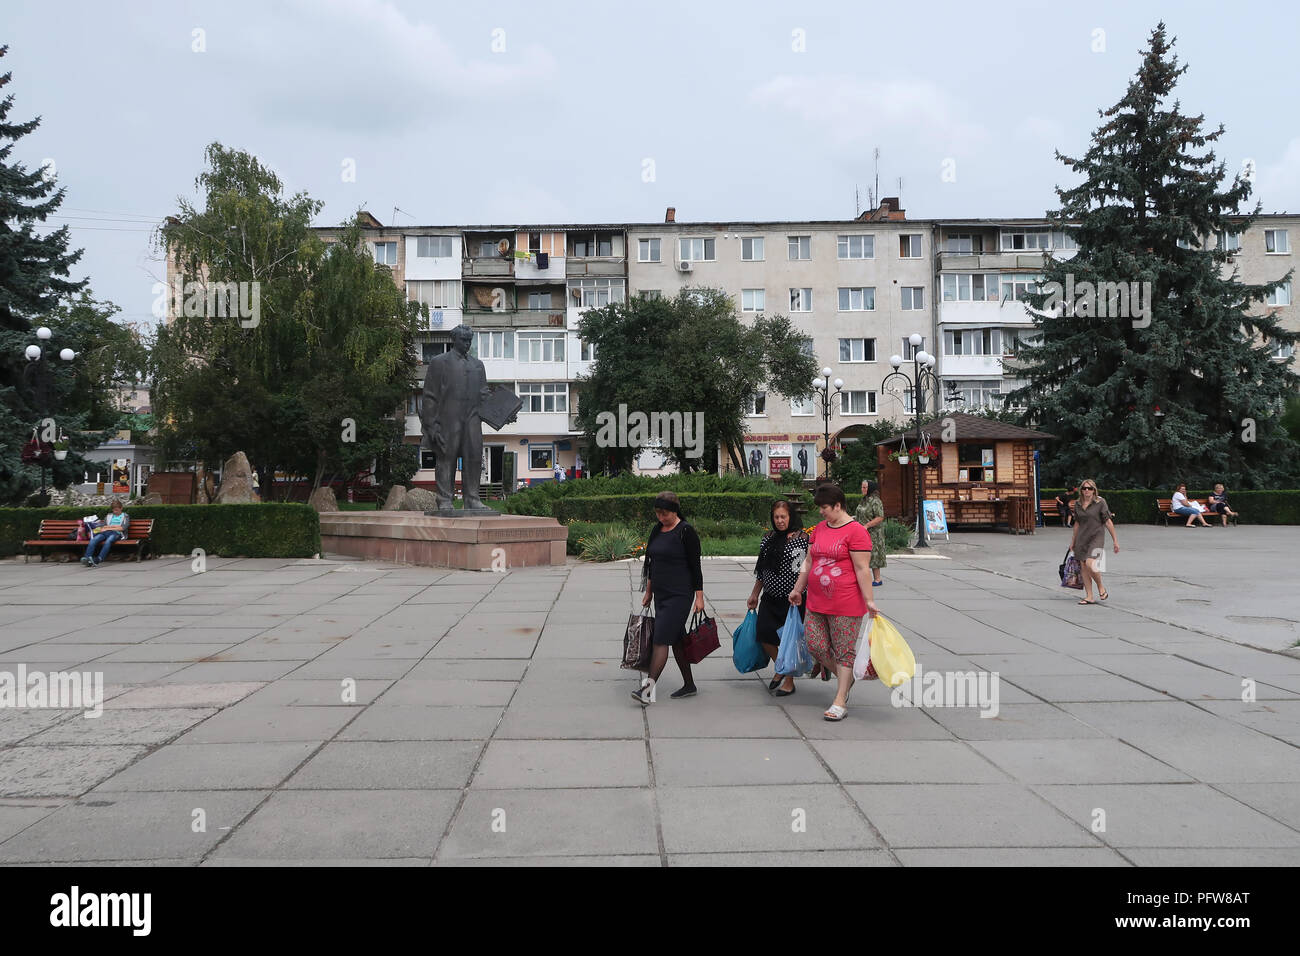 Pedestrians walk past monument to Taras Shevchenko who was a notable Ukrainian poet and writer in the city of Chortkiv which was once home to a large Jewish community and was annihilated, brutally, by the Germans during the Second World War in Ternopil Oblast (province) in western Ukraine. Stock Photo